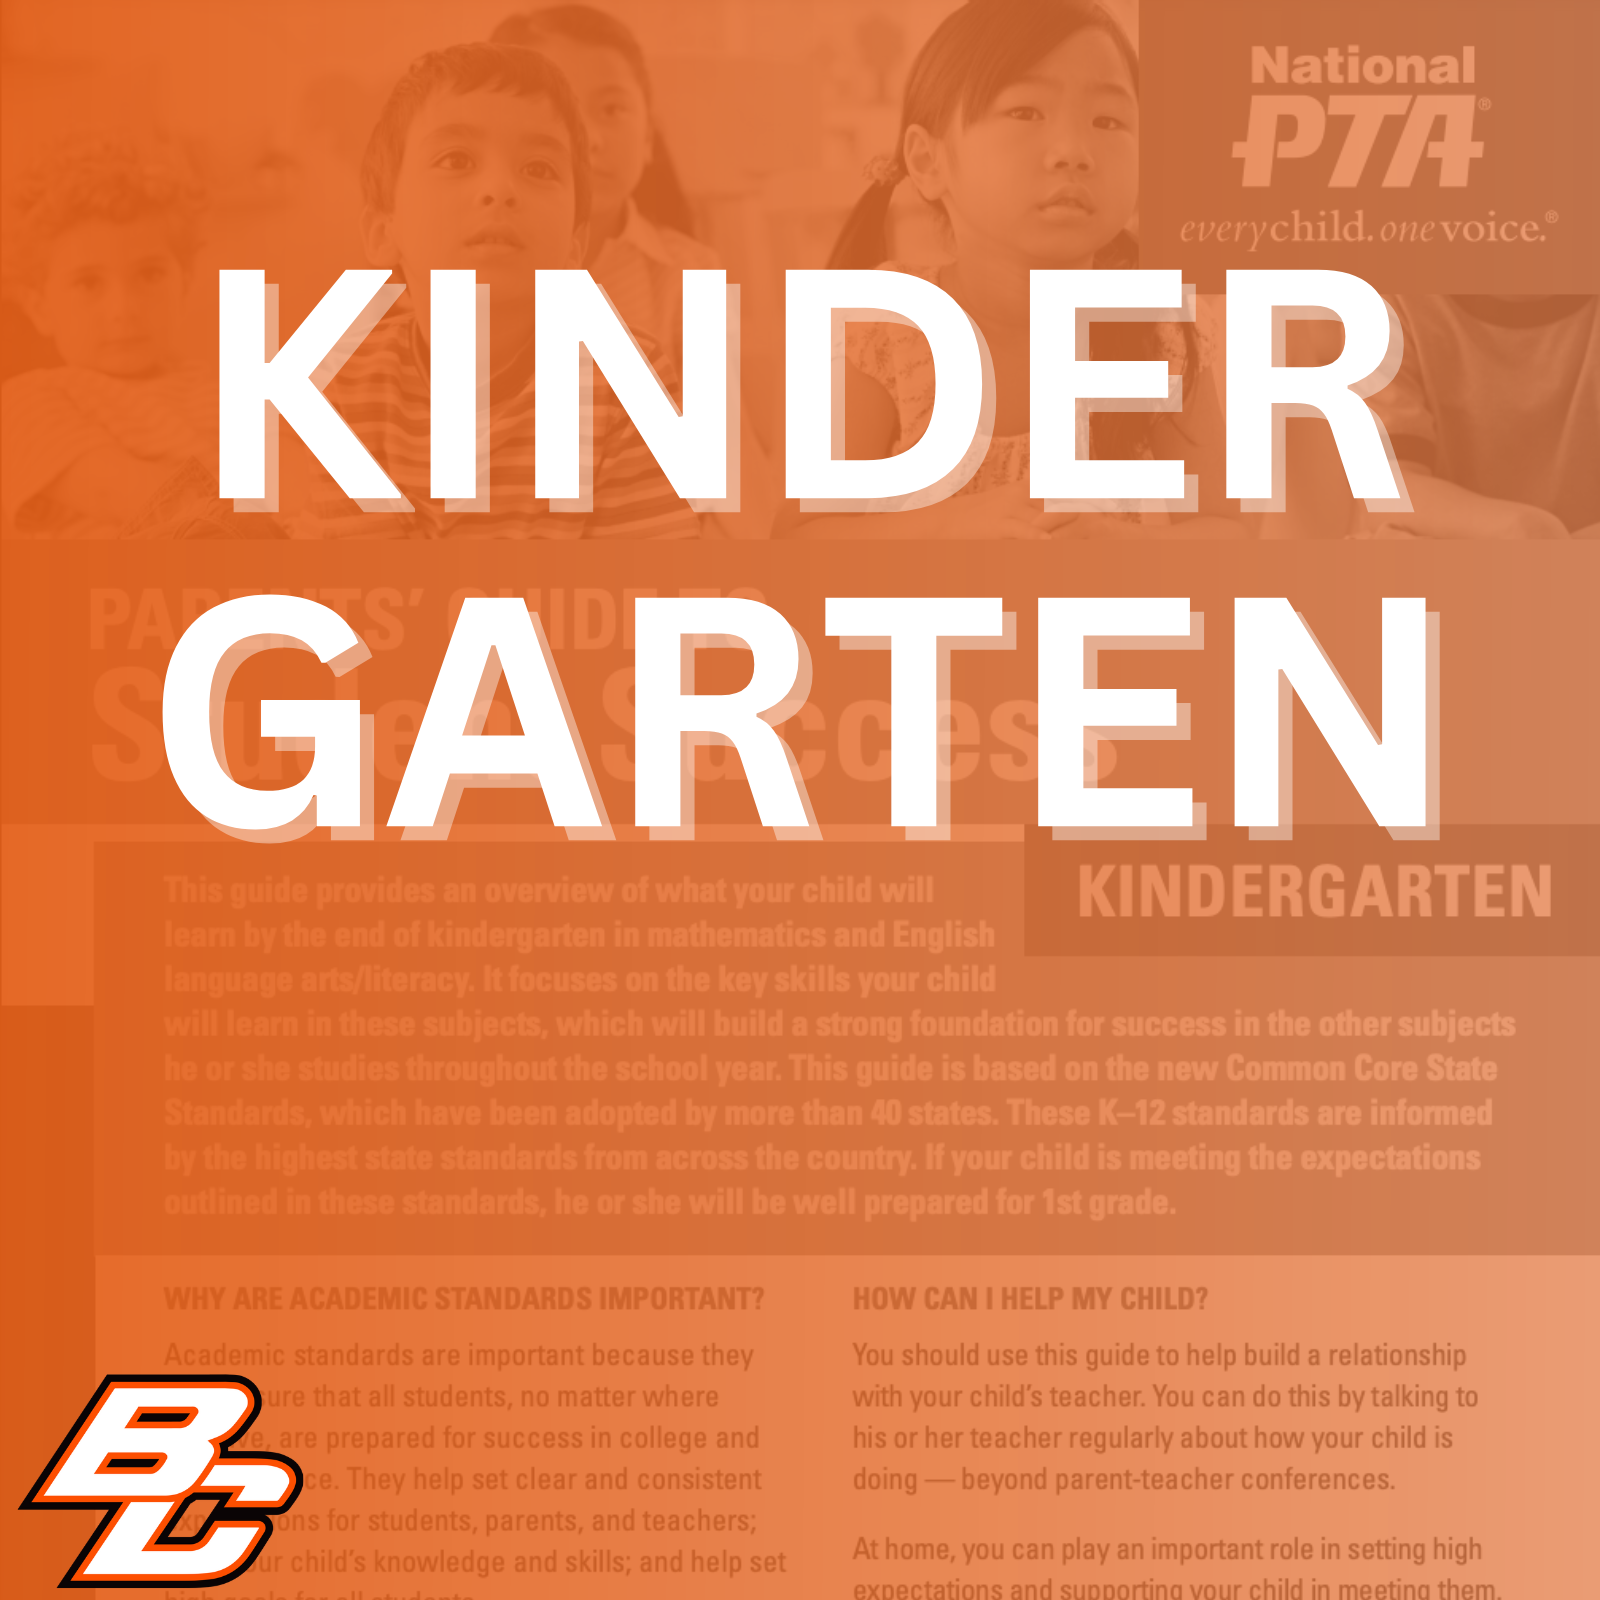 Parent’s Guide to Student Success for Kindergarten: This guide provides an overview of what your child will learn by the end of kindergarten in mathematics and English language arts/literacy. It focuses on the key skills your child will learn in these subjects, which will build a strong foundation for success in the other subjects he or she studies throughout the school year. This guide is based on the new Common Core State Standards, which have been adopted by more than 40 states. These K-12 standards are informed by the highest state standards from across the country. If your child is meeting the expectations outlined in these standards, he or she will be well prepared for 1st grade.  Why are academic standards important? Academic standards are important because they help ensure that all students, no matter where they live, are prepared for success in college and the workforce. They help set clear and consistent expectations for students, parents, and teachers; build your child's knowledge and skills; and help set high goals for all students.  Of course, high standards are not the only thing needed for our children's success. But standards provide an important first step - a clear roadmap for learning for teachers, parents, and students. Having clearly defined goals helps families and teachers work together to ensure that students succeed. Standards help parents and teachers know when students need extra assistance or when they need to be challenged even more. They also will help your child develop critical thinking skills that will prepare him or her for college and career.  How can I help my child? You should use this guide to help build a relationship with your child's teacher. You can do this by talking to his or her teacher regularly about how your child is doing - beyond parent-teacher conferences.  At home, you can play an important role in setting high expectations and supporting your child in meeting them. If your child needs a little extra help or wants to learn more about a subject, work with his or her teacher to identify opportunities for tutoring, to get involved in clubs after school, or to find other resources.  This guide includes: An overview of some of the key things your child will learn in English/literacy and math in kindergarten, ideas for activities to help your child learn at home and topics of discussion for talking to your child's teacher about his or her academic progress.